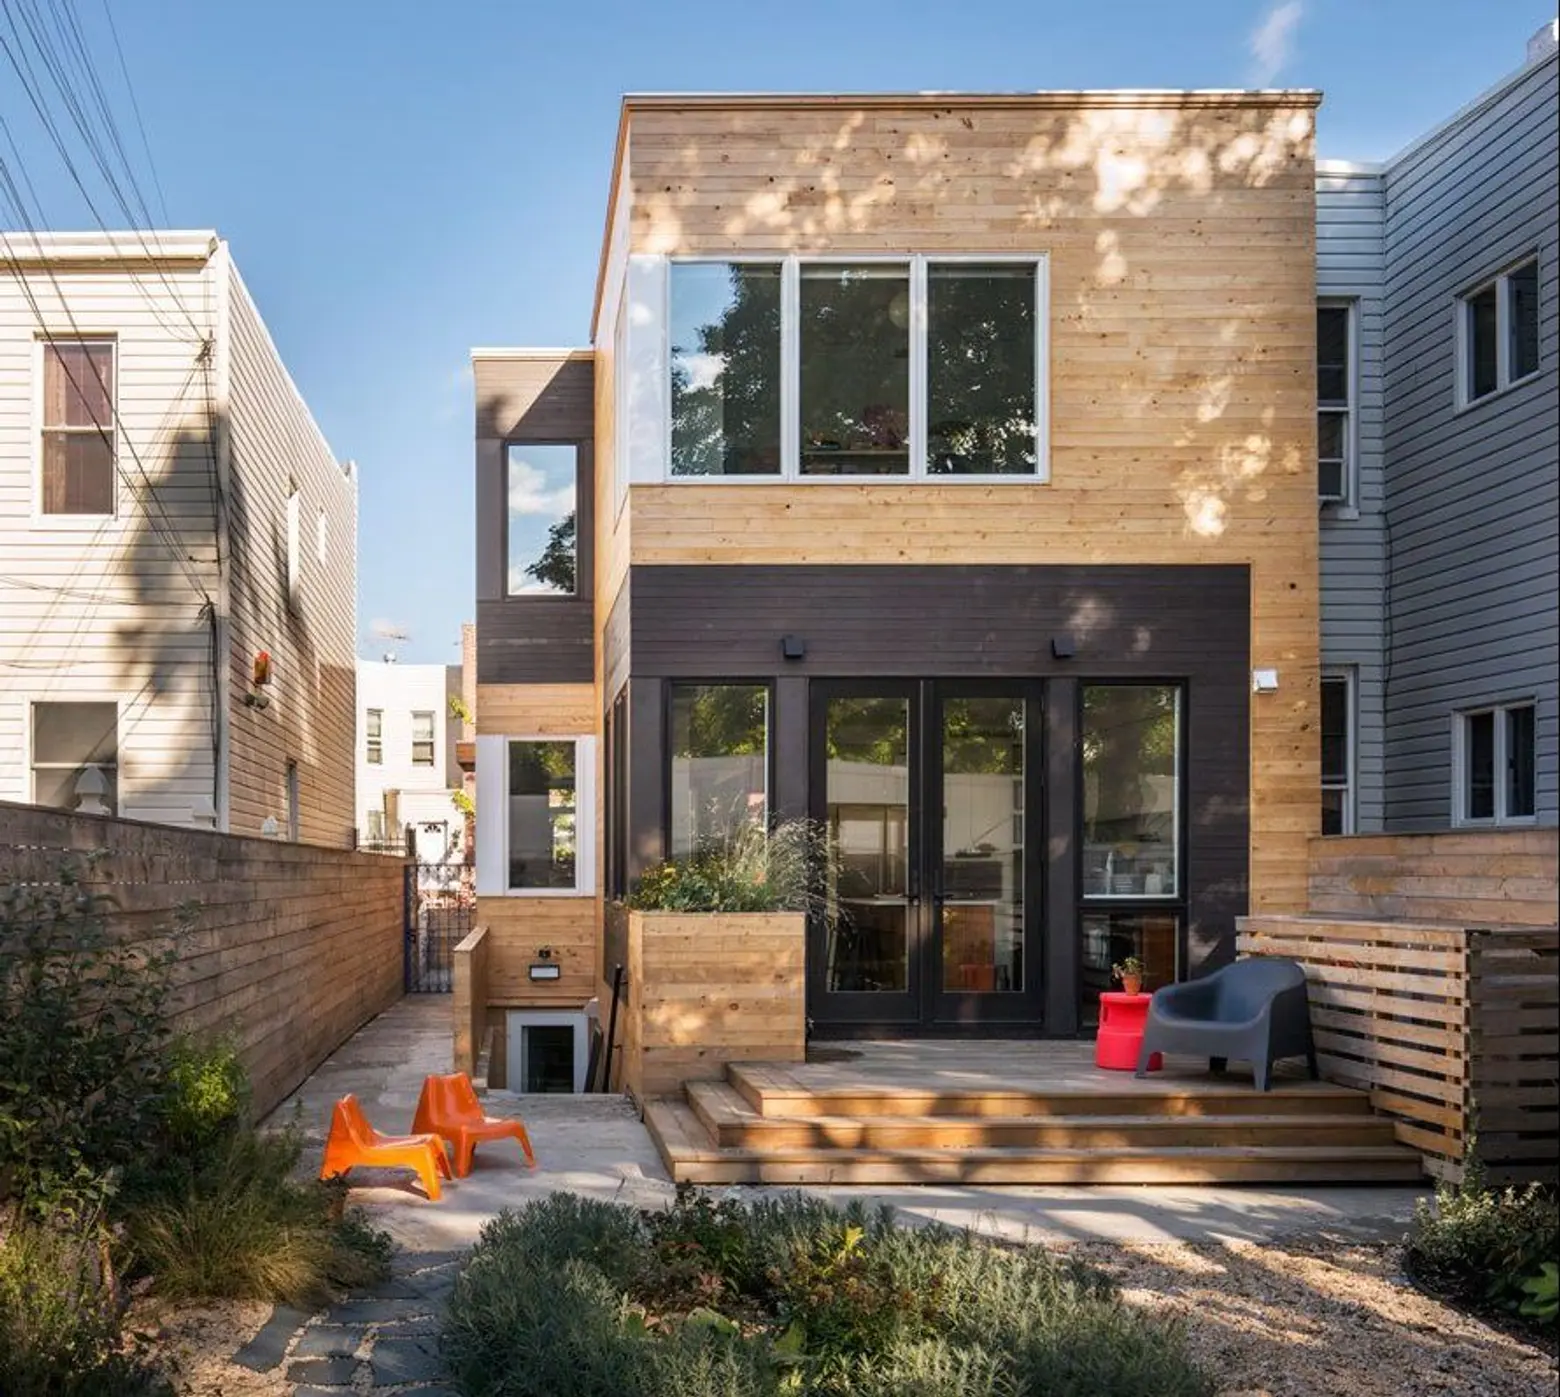 BFDO Architects renovated this Brooklyn rowhouse to capture light from every corner